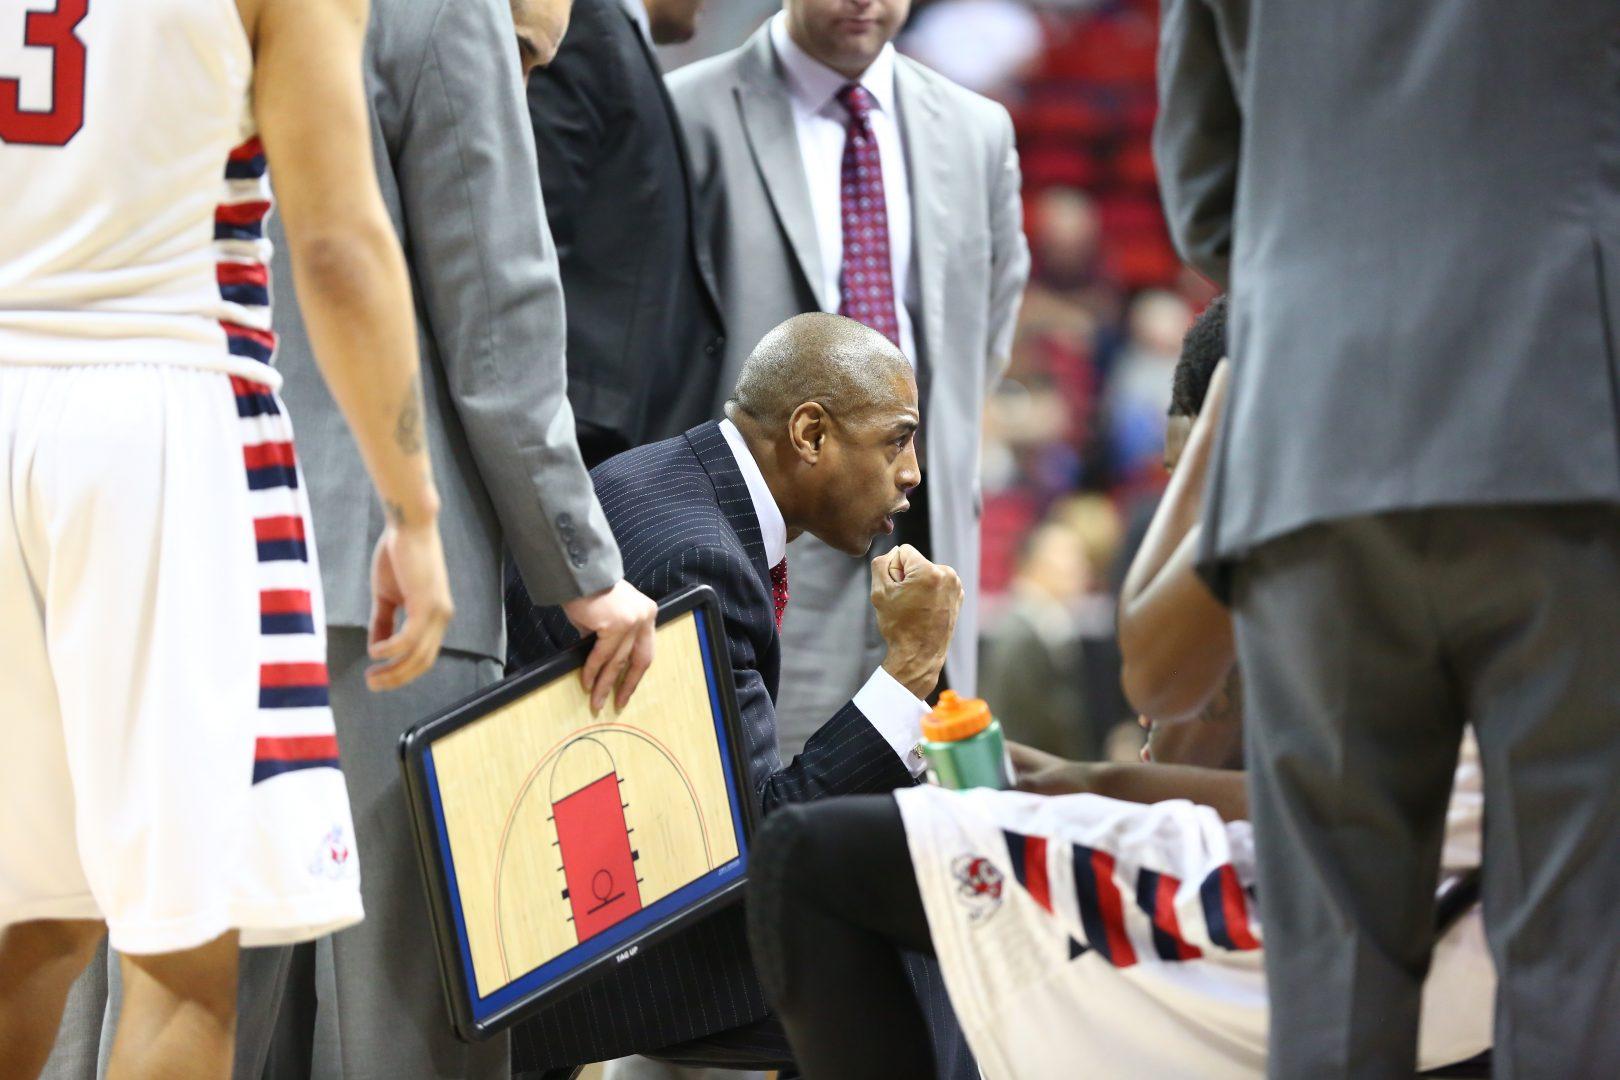 Fresno+State+head+coach+Rodney+Terry+instructs+his+team+during+a+timeout+in+the+Bulldogs+61-59+victory+over+Air+Force+Wednesday+night.+Photo+by+Khlarissa+Agee%2FThe+Collegian